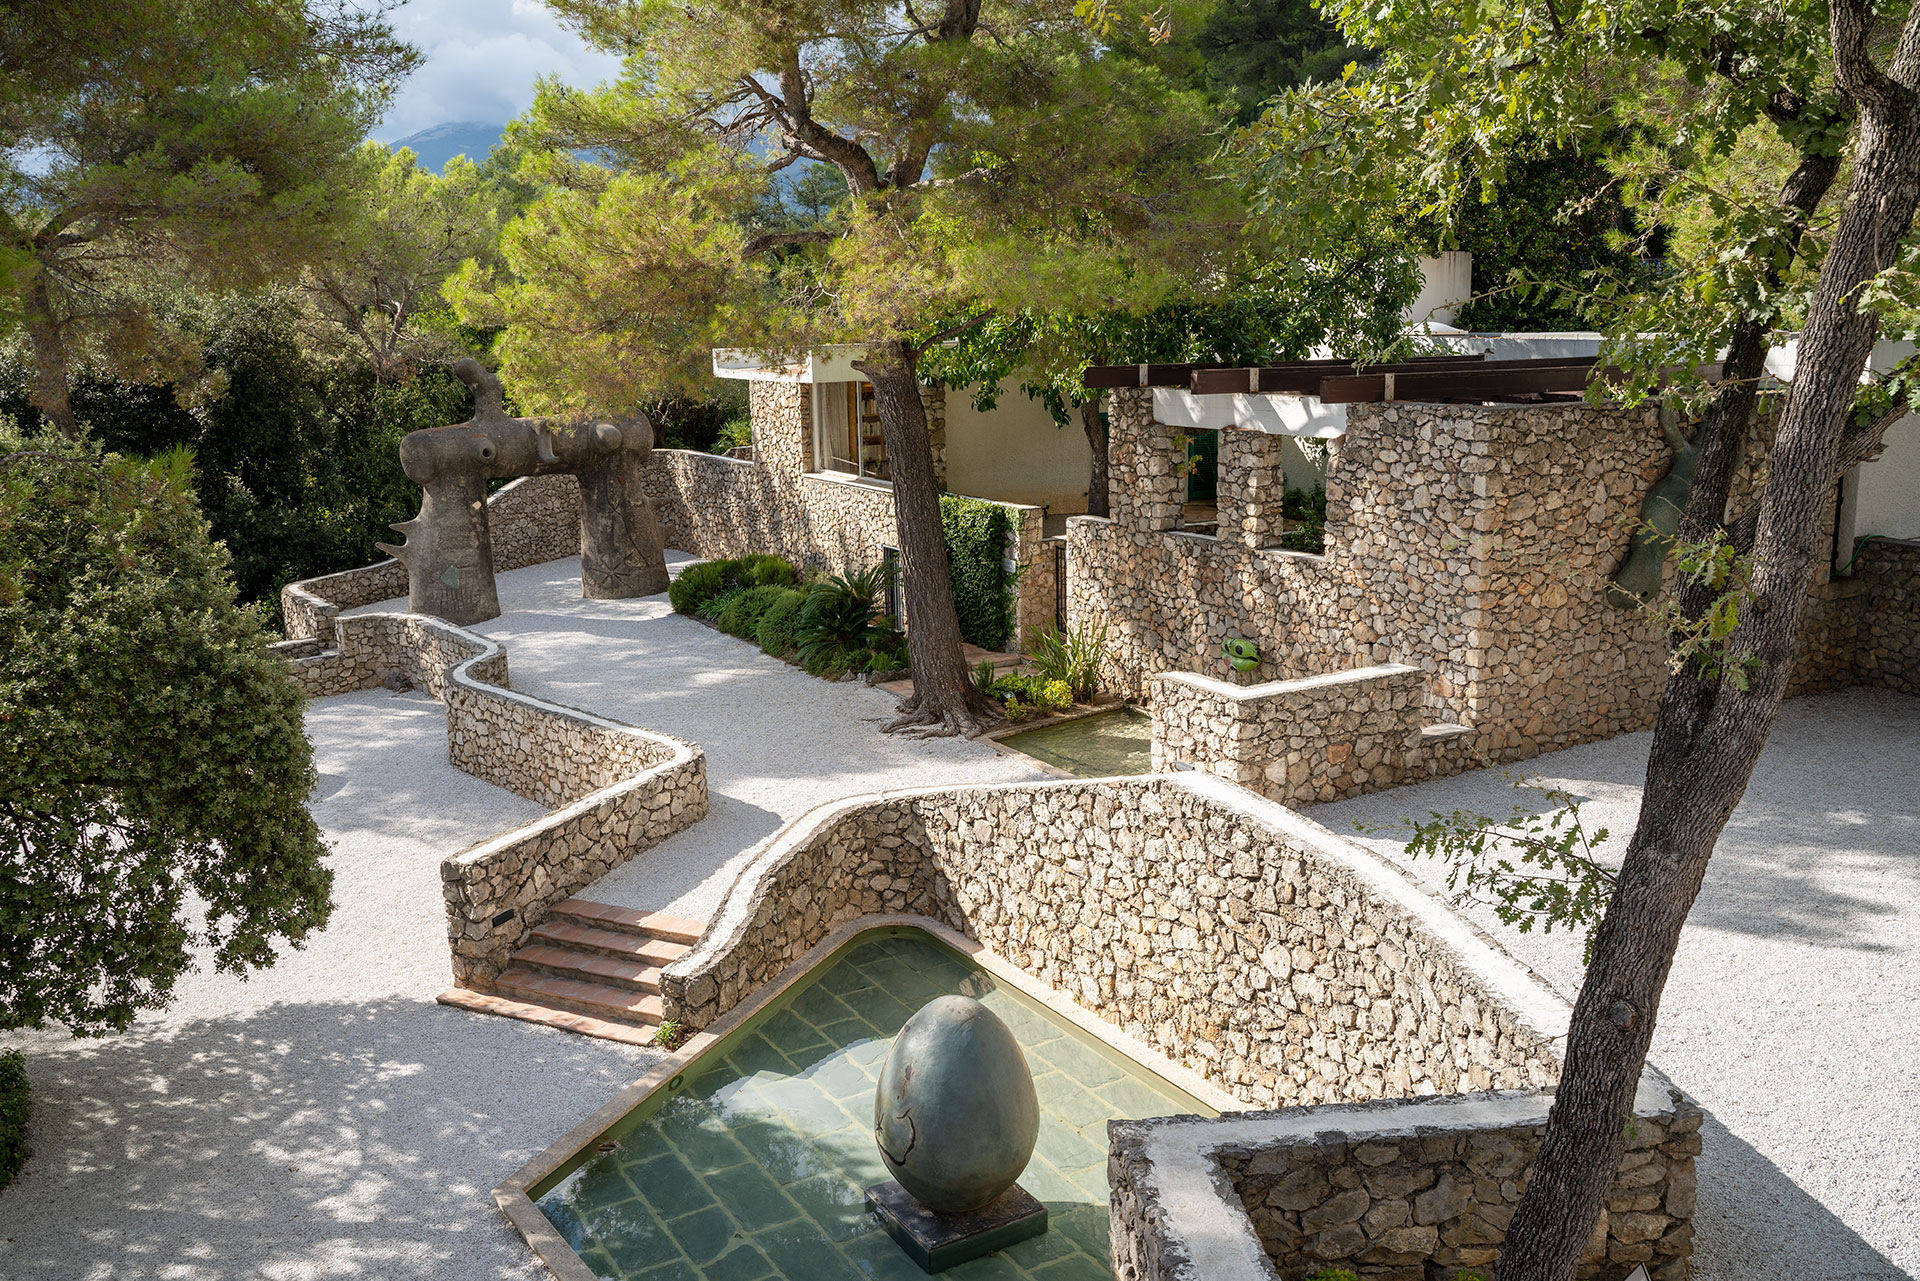 Fondation Maeght - France's first independent art foundation